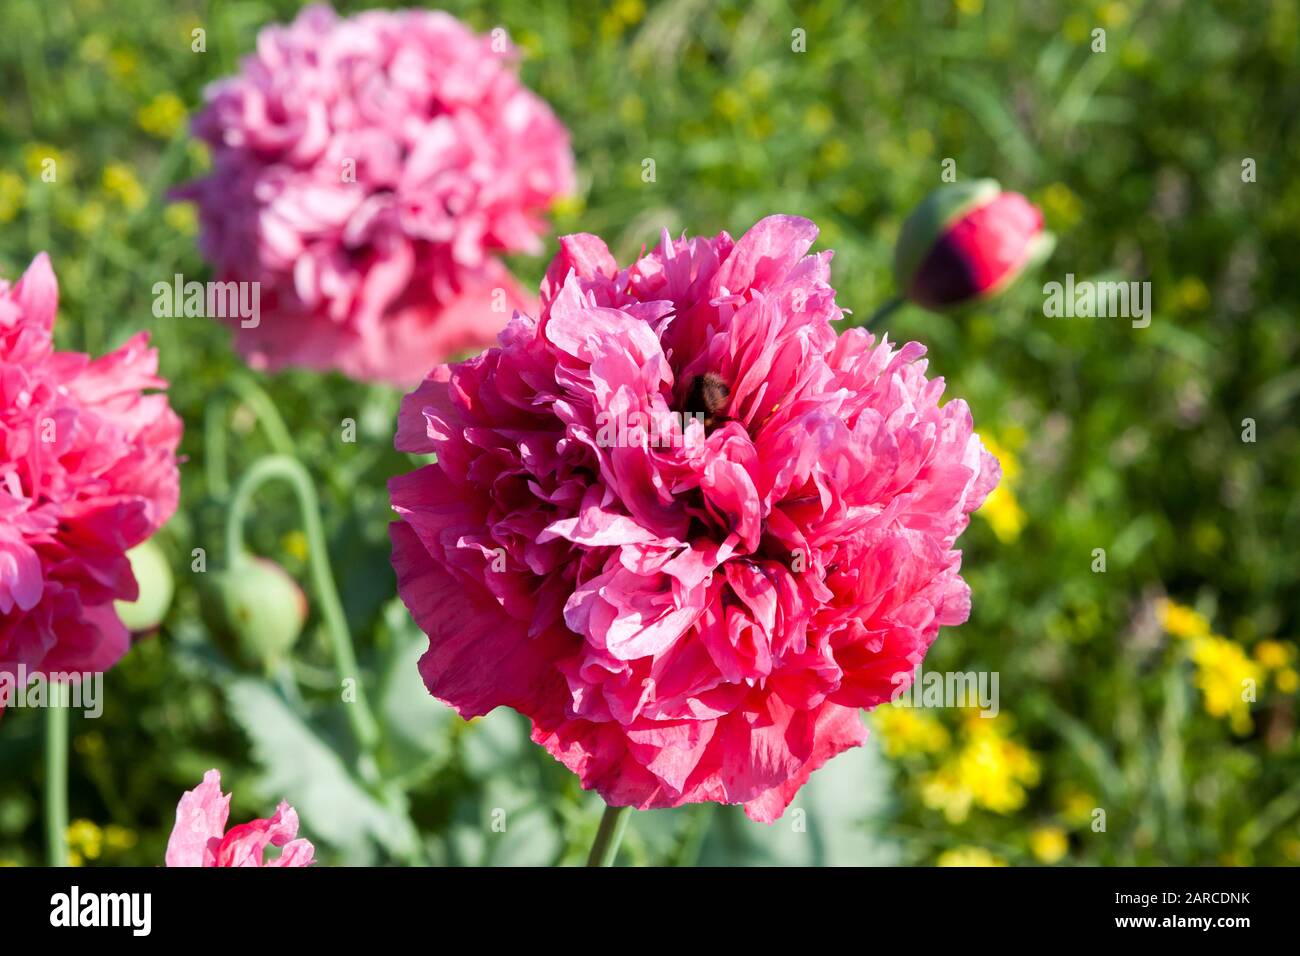 Giant pink double poppies growing wild in Stokes Bay, Gosport, Hampshire, UK Stock Photo